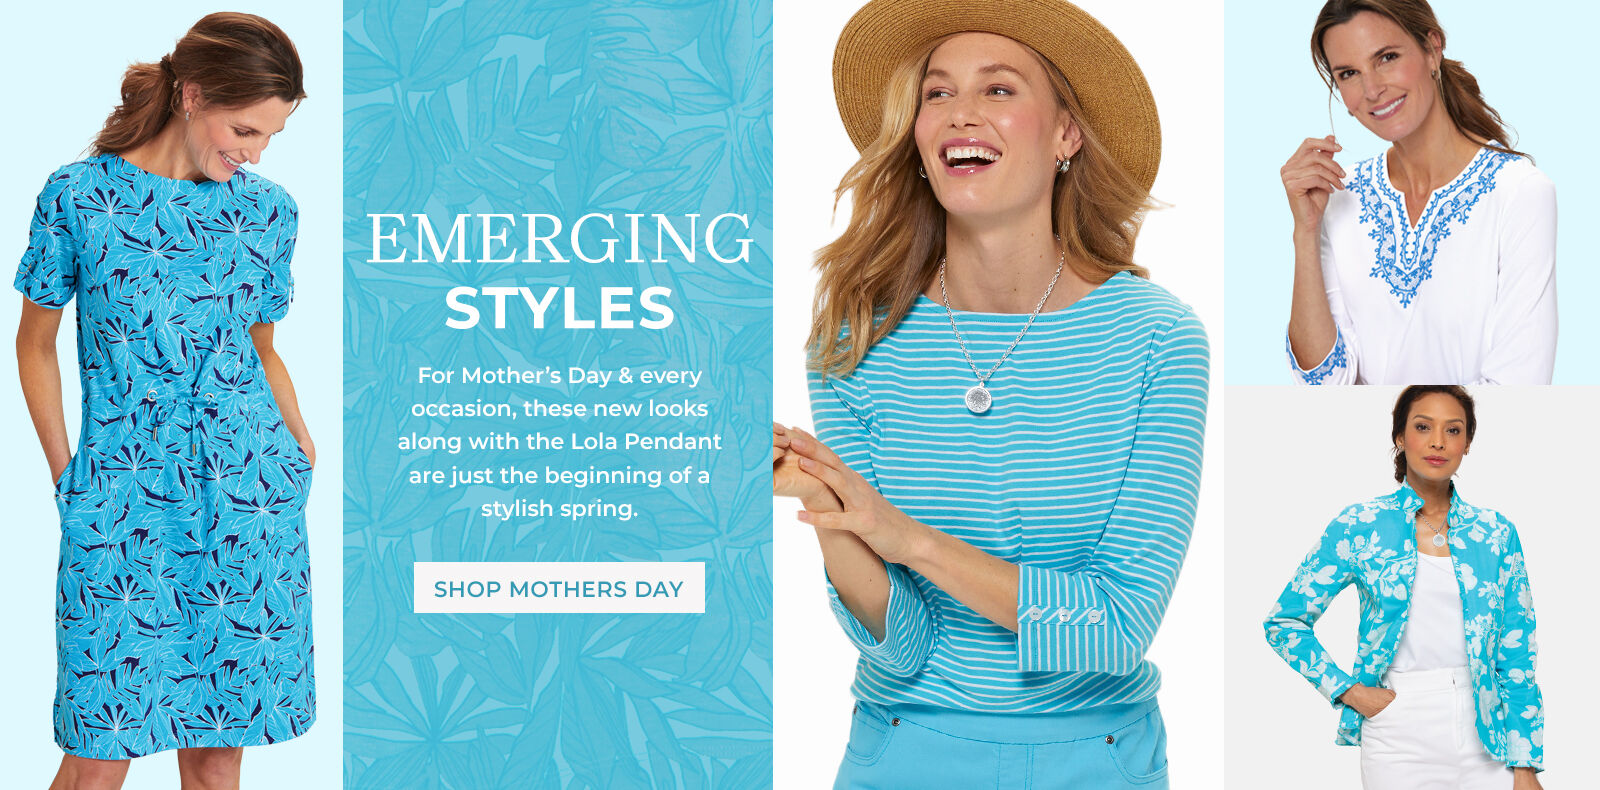 emerging styles for mother's day & every occasion, these new looks along with the lola pendant are just the beginning of a stylish pairing. shop mother's day